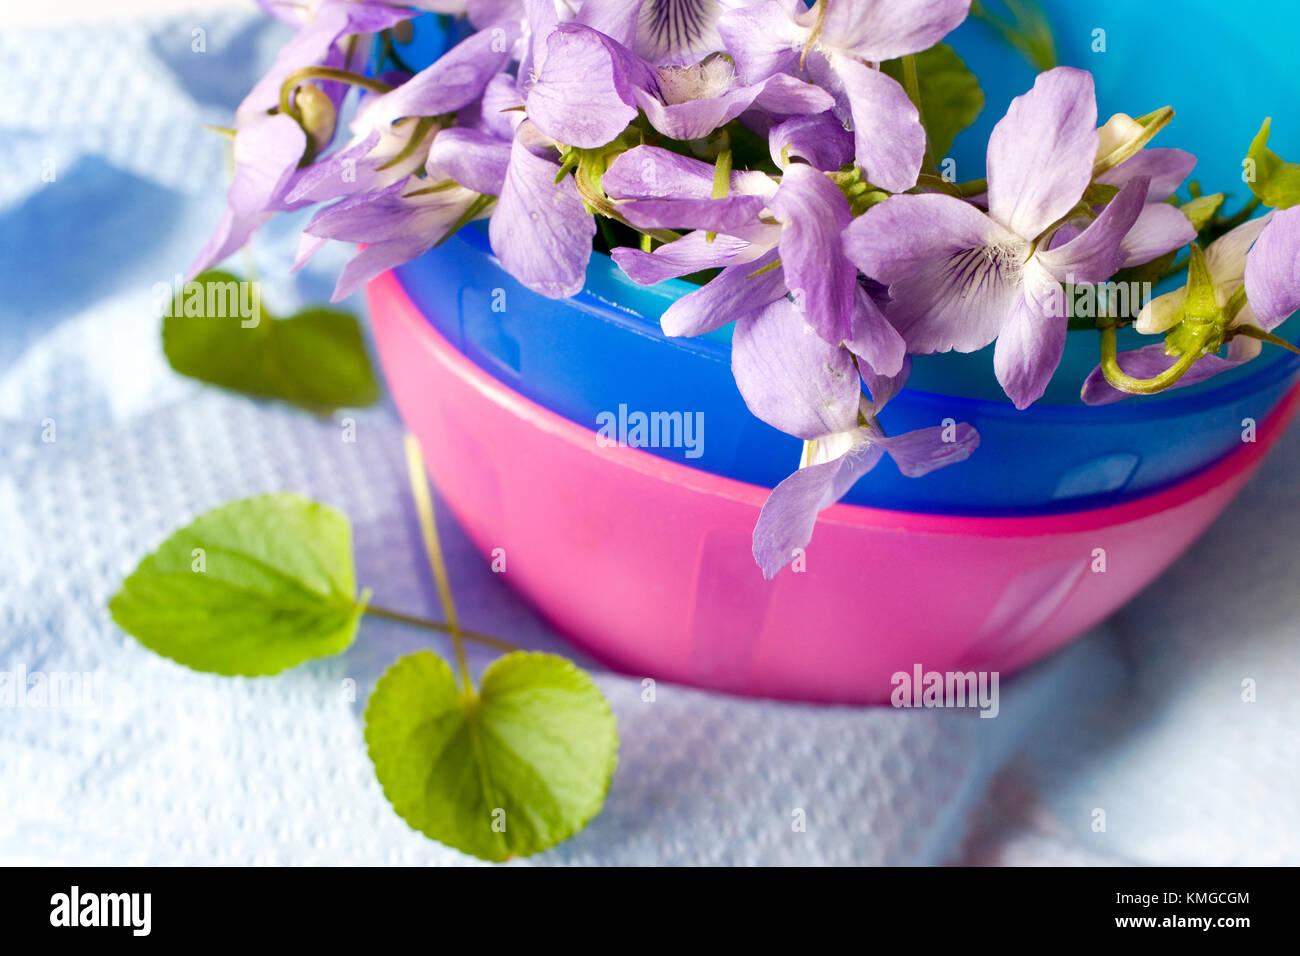 Common Dog Violet - Viola riviniana - spring flower in a decorative bowl - aromatic home decor - aromatherapy Stock Photo